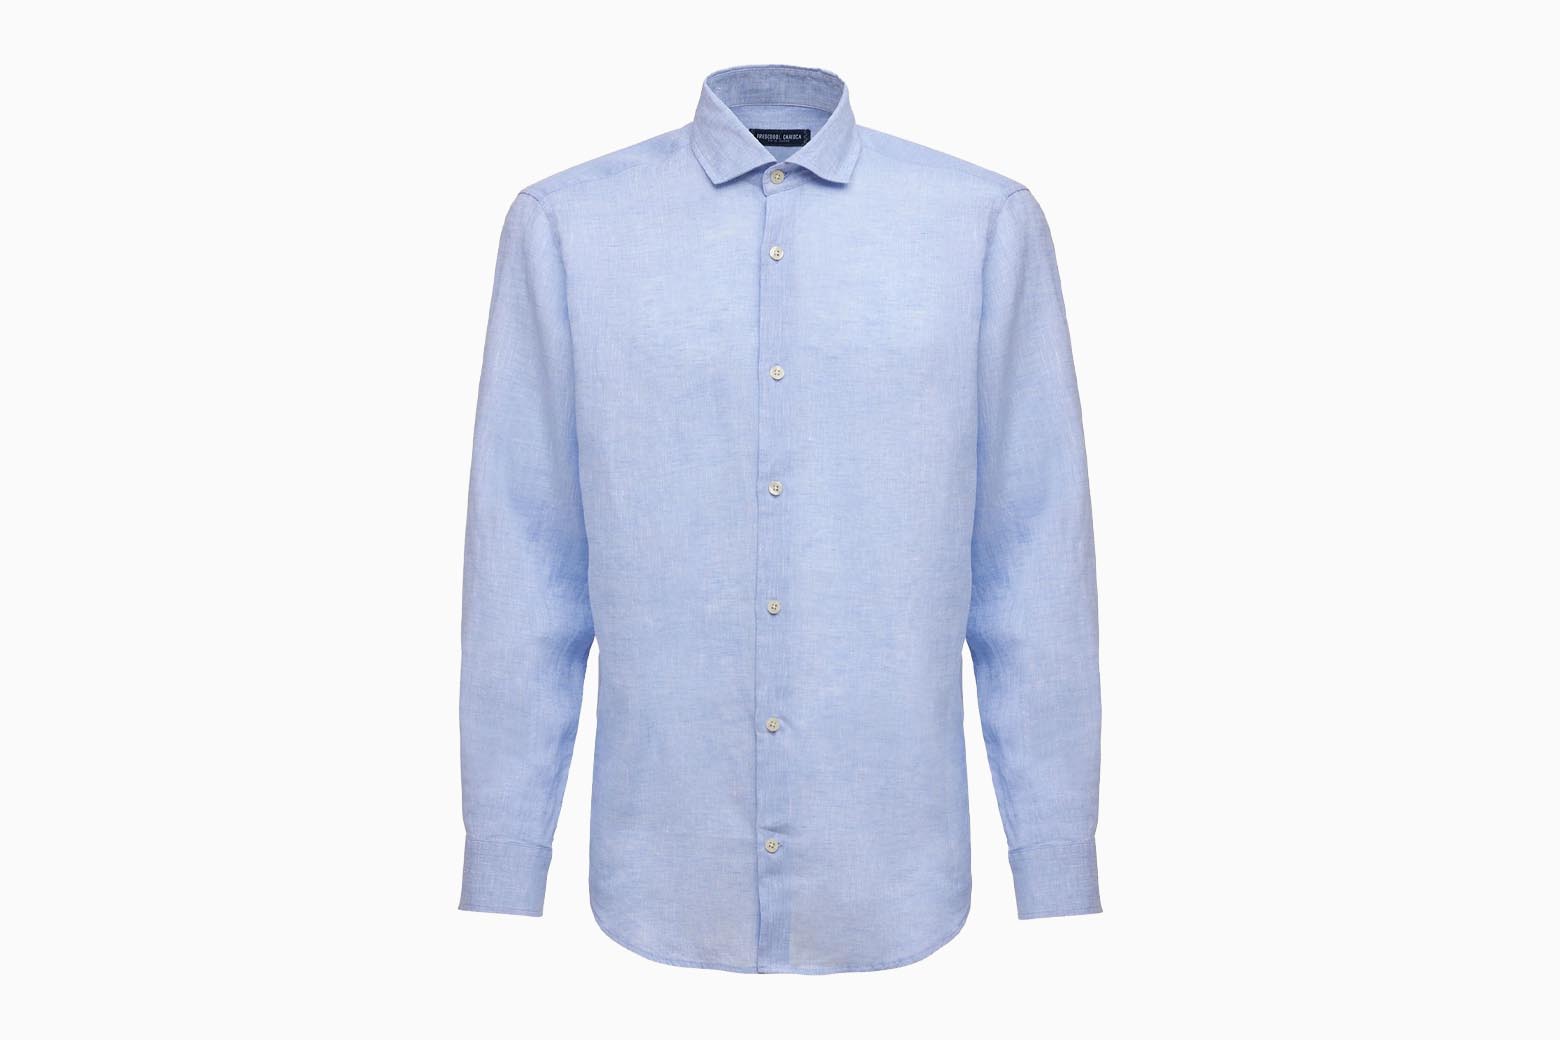 17 Best Dress Shirts For Men: Up Your Style Game